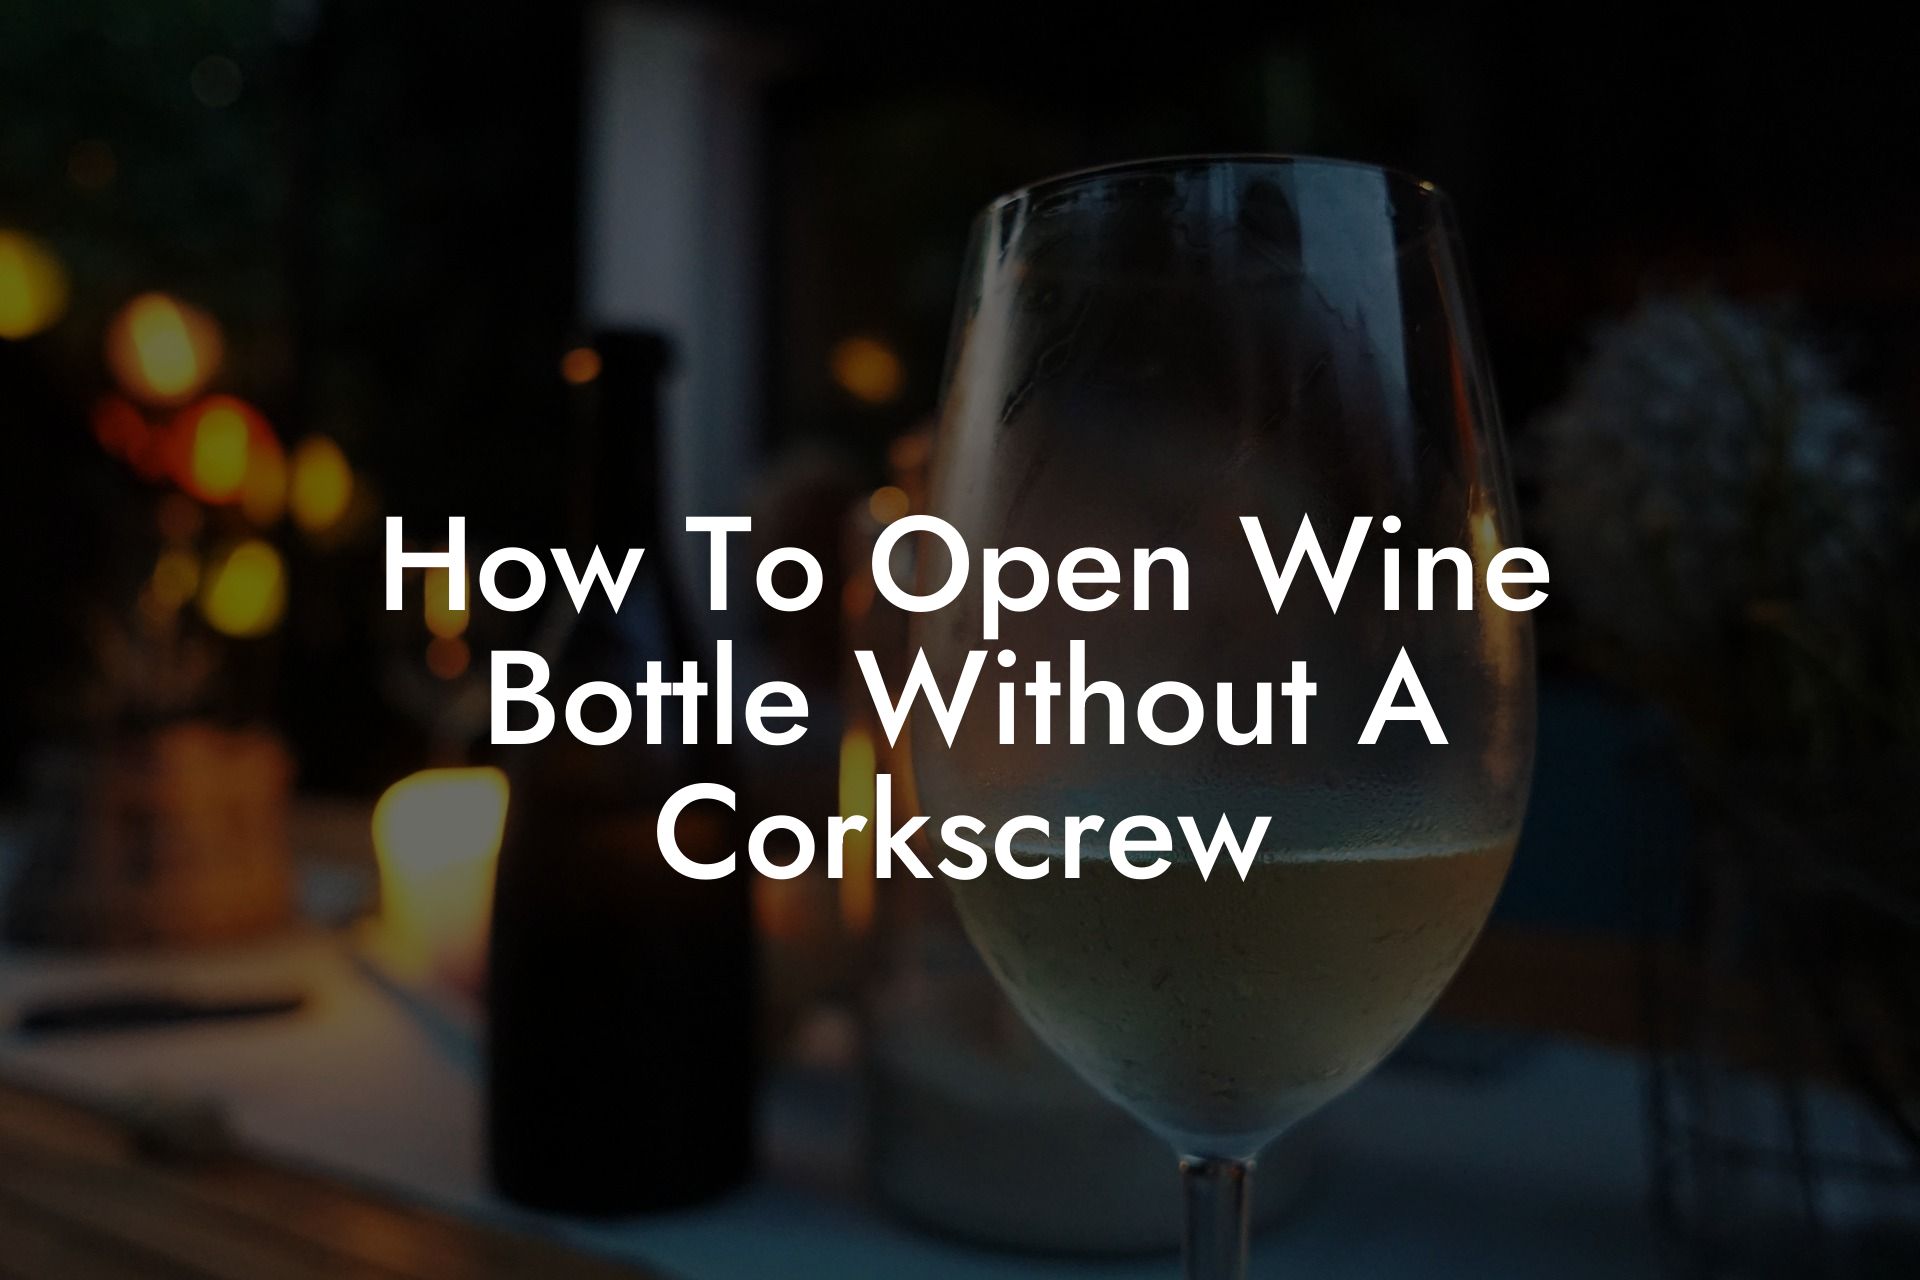 How To Open Wine Bottle Without A Corkscrew